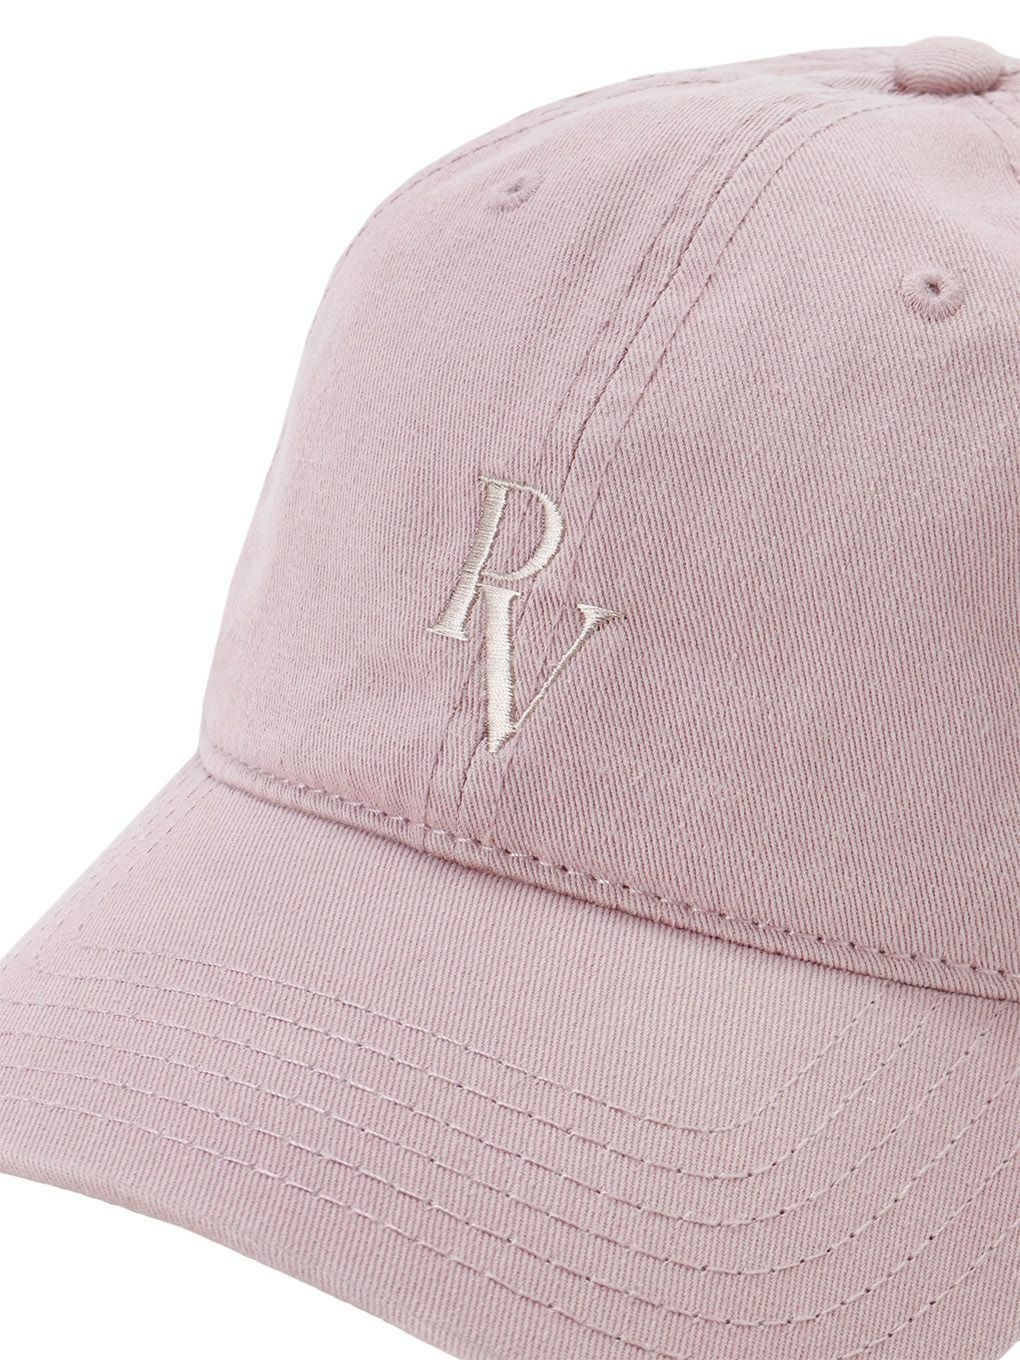 THE PV LOGO EMBROIDERY CAP